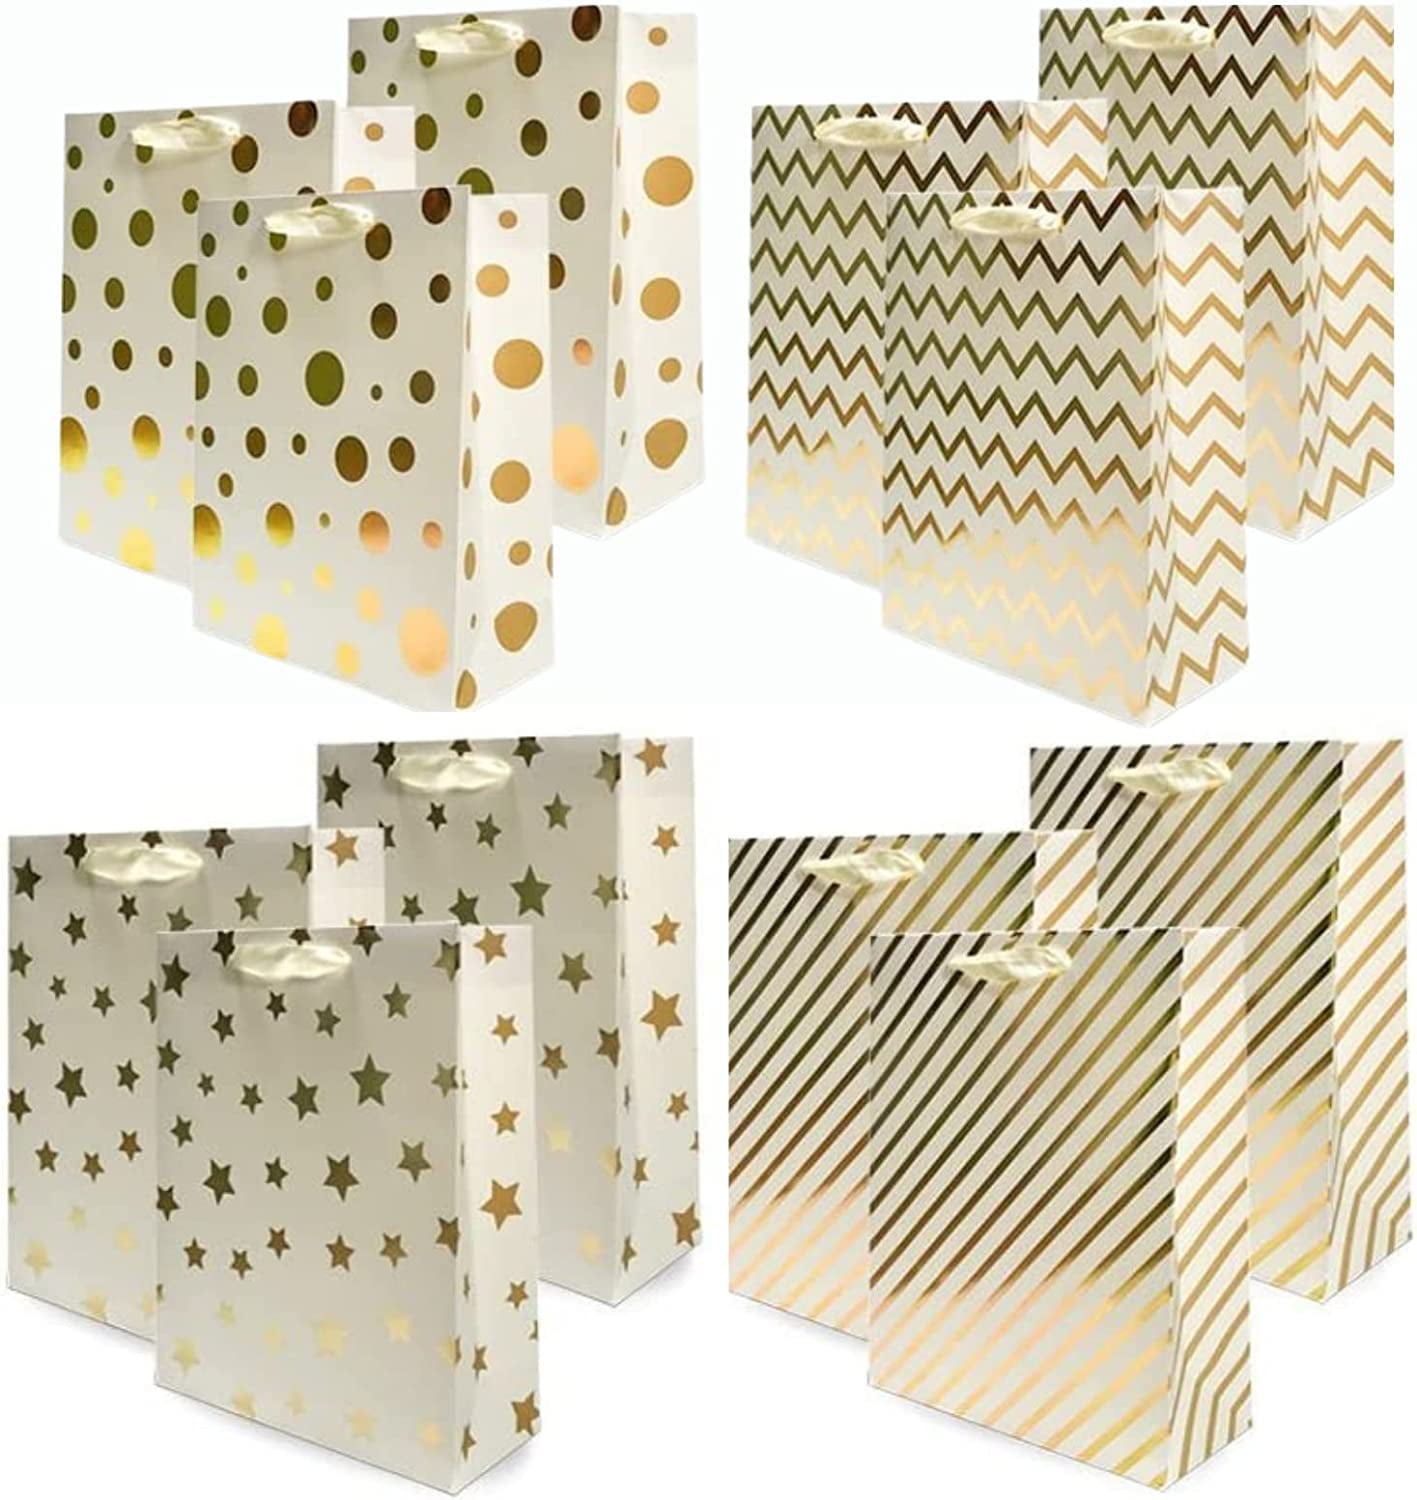 UNIQOOO 12PCS Metallic Gold Christmas Gift Bags Bulk with Handle, Large  12.5 x10 Inch, Assorted Modern Geometric Paper Gift Wrap Bags, For  Valentines Day Holiday Birthday Wedding Gift Packaging Decor 